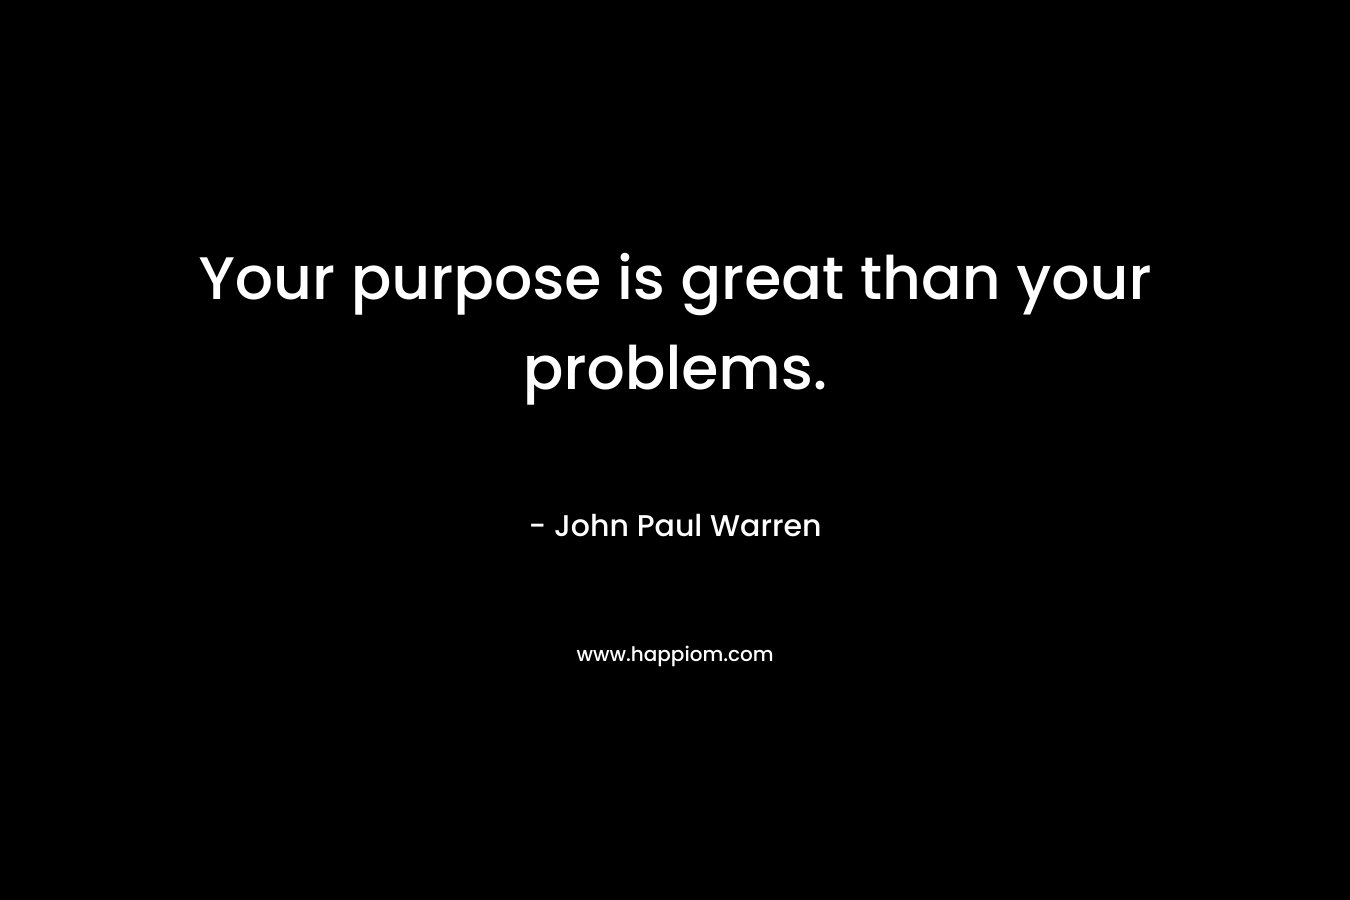 Your purpose is great than your problems.